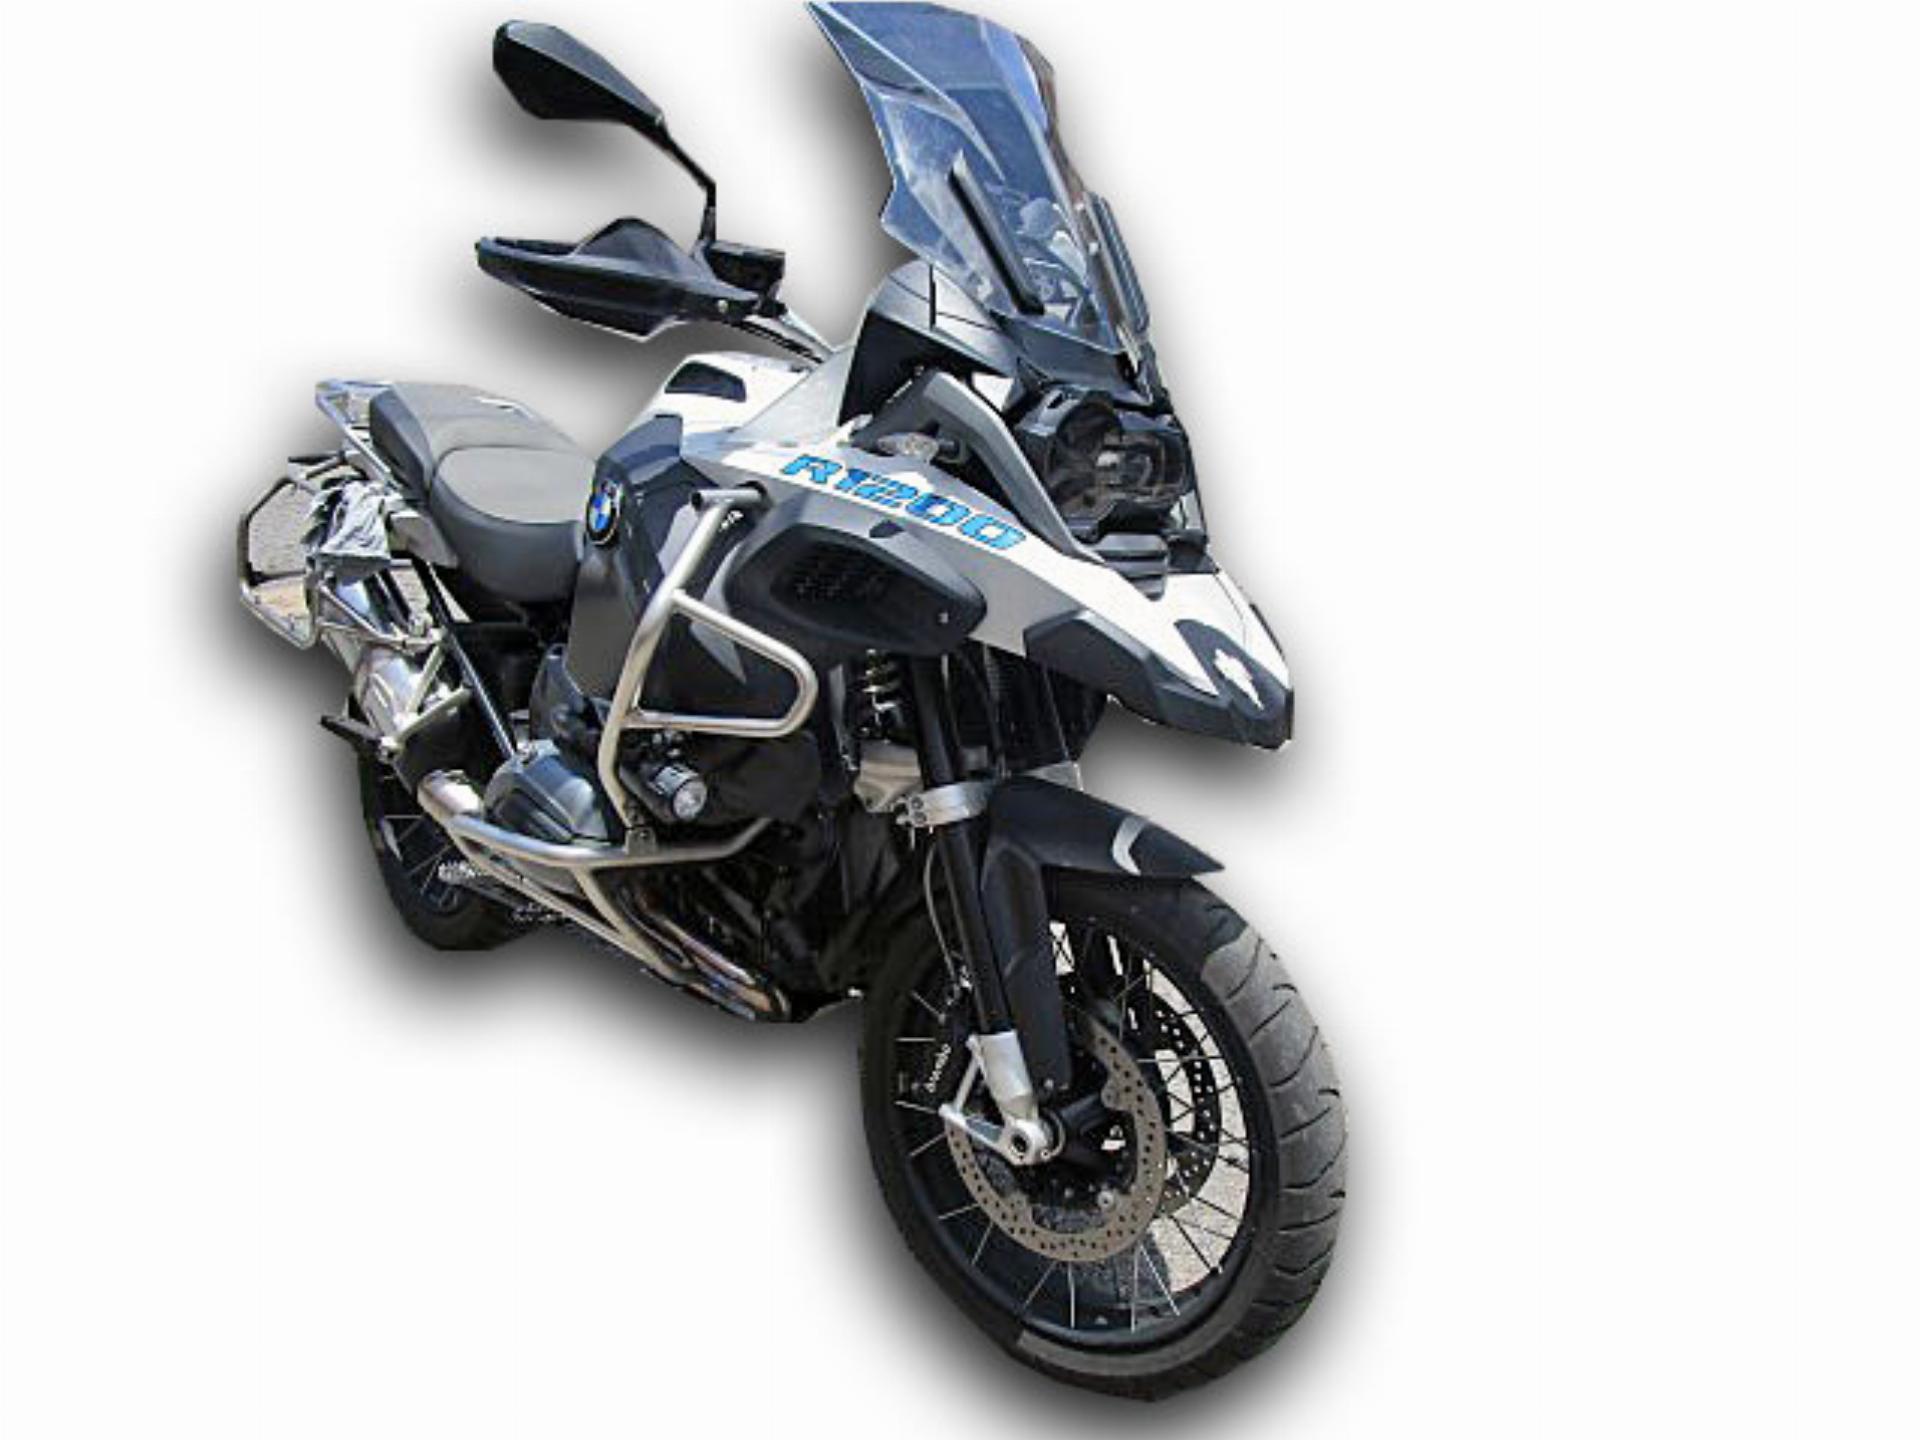 BMW Motorcycles R 1200 GS